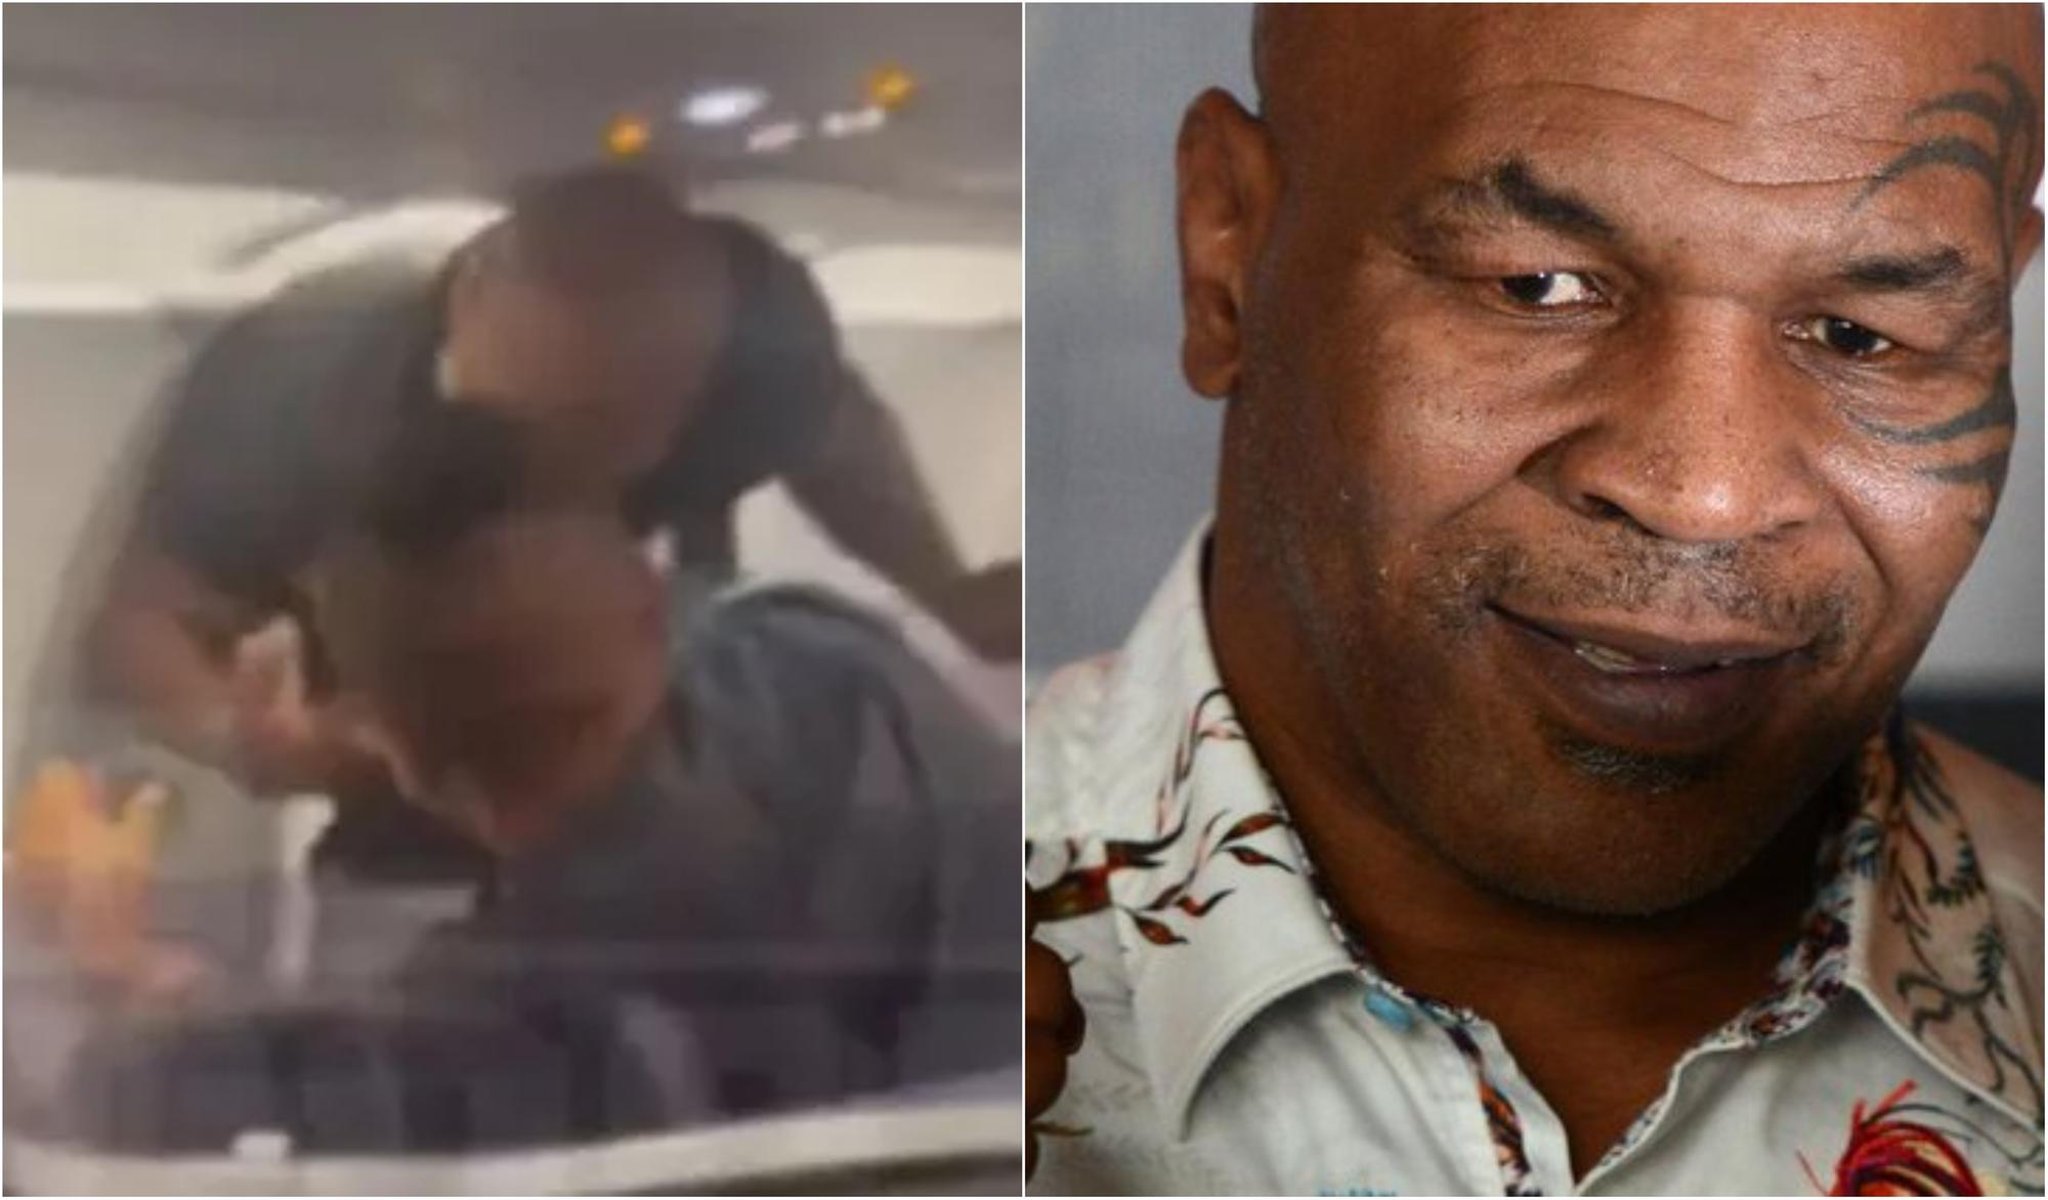 MIKE TYSON REPEATEDLY PUNCHES MAN ON PLANE – SEE THE VIDEO